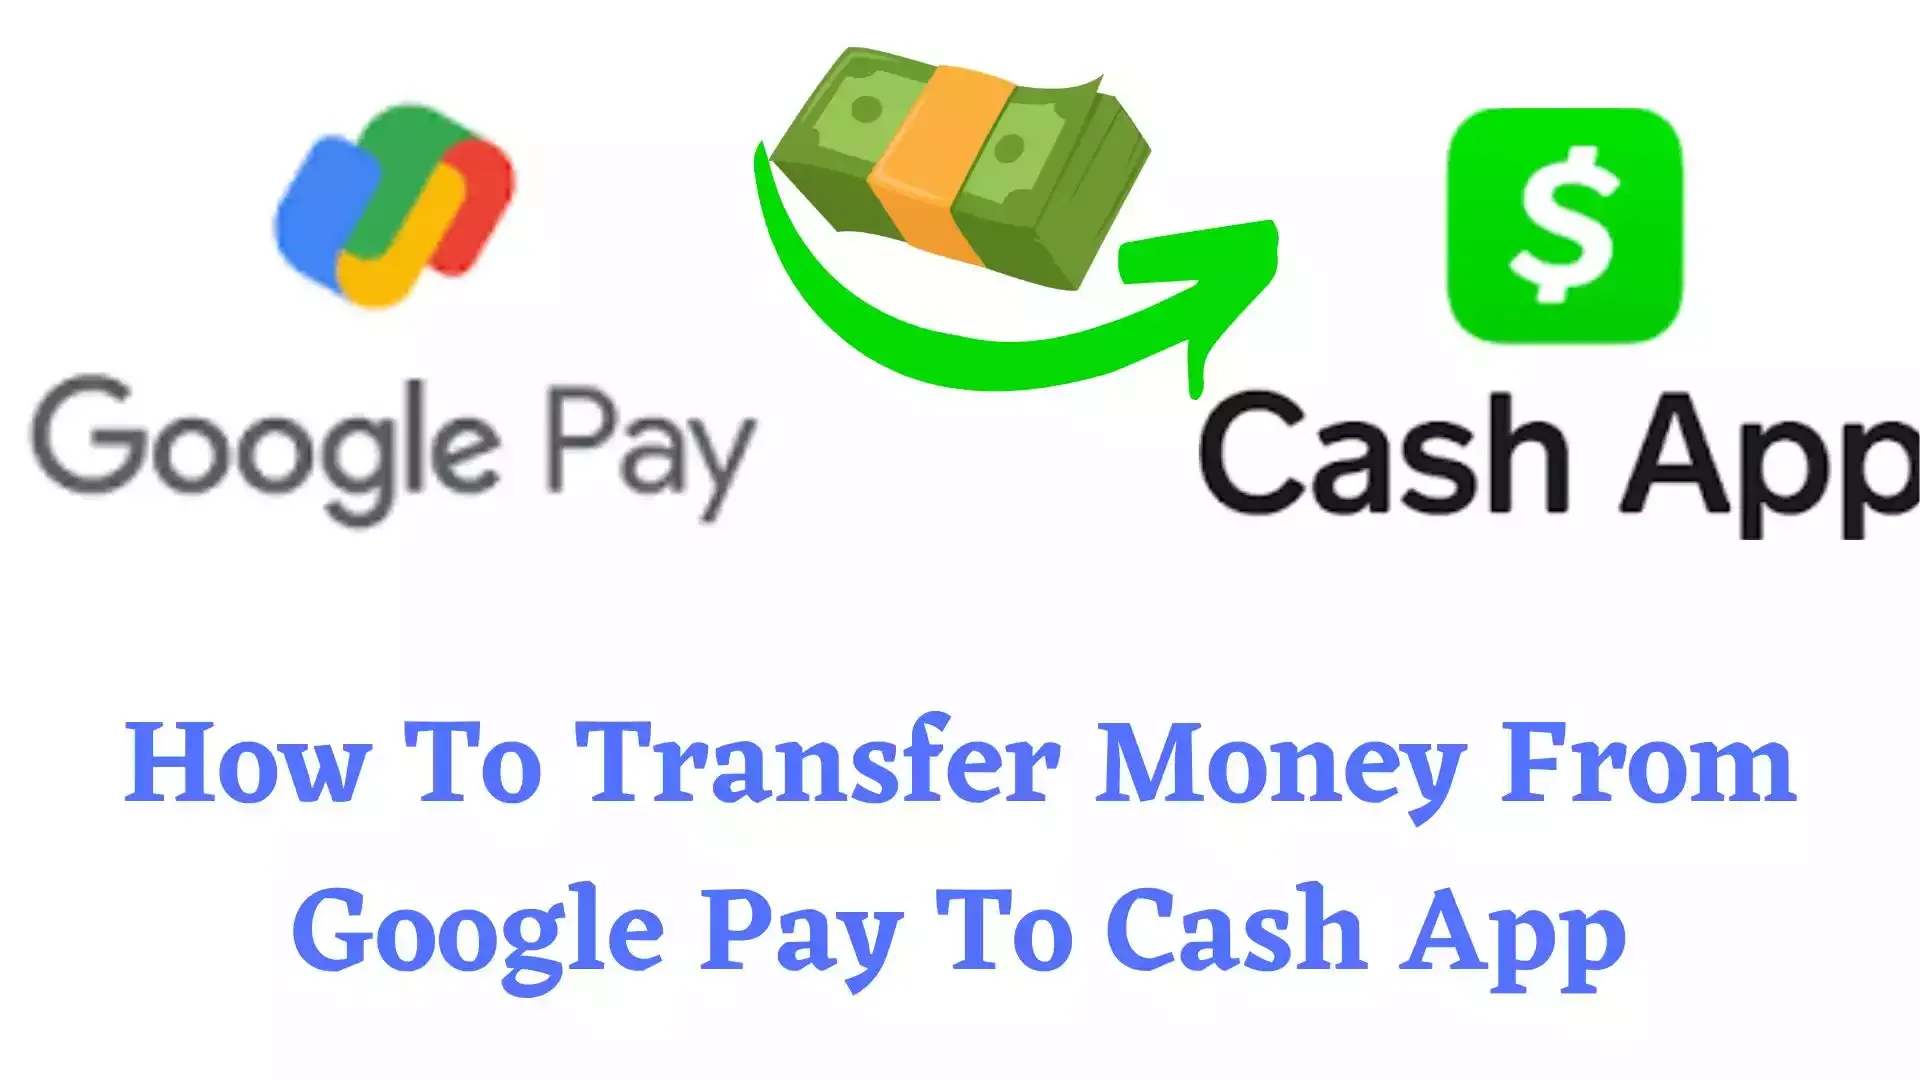 Transfer Money From Google Pay To Cash App